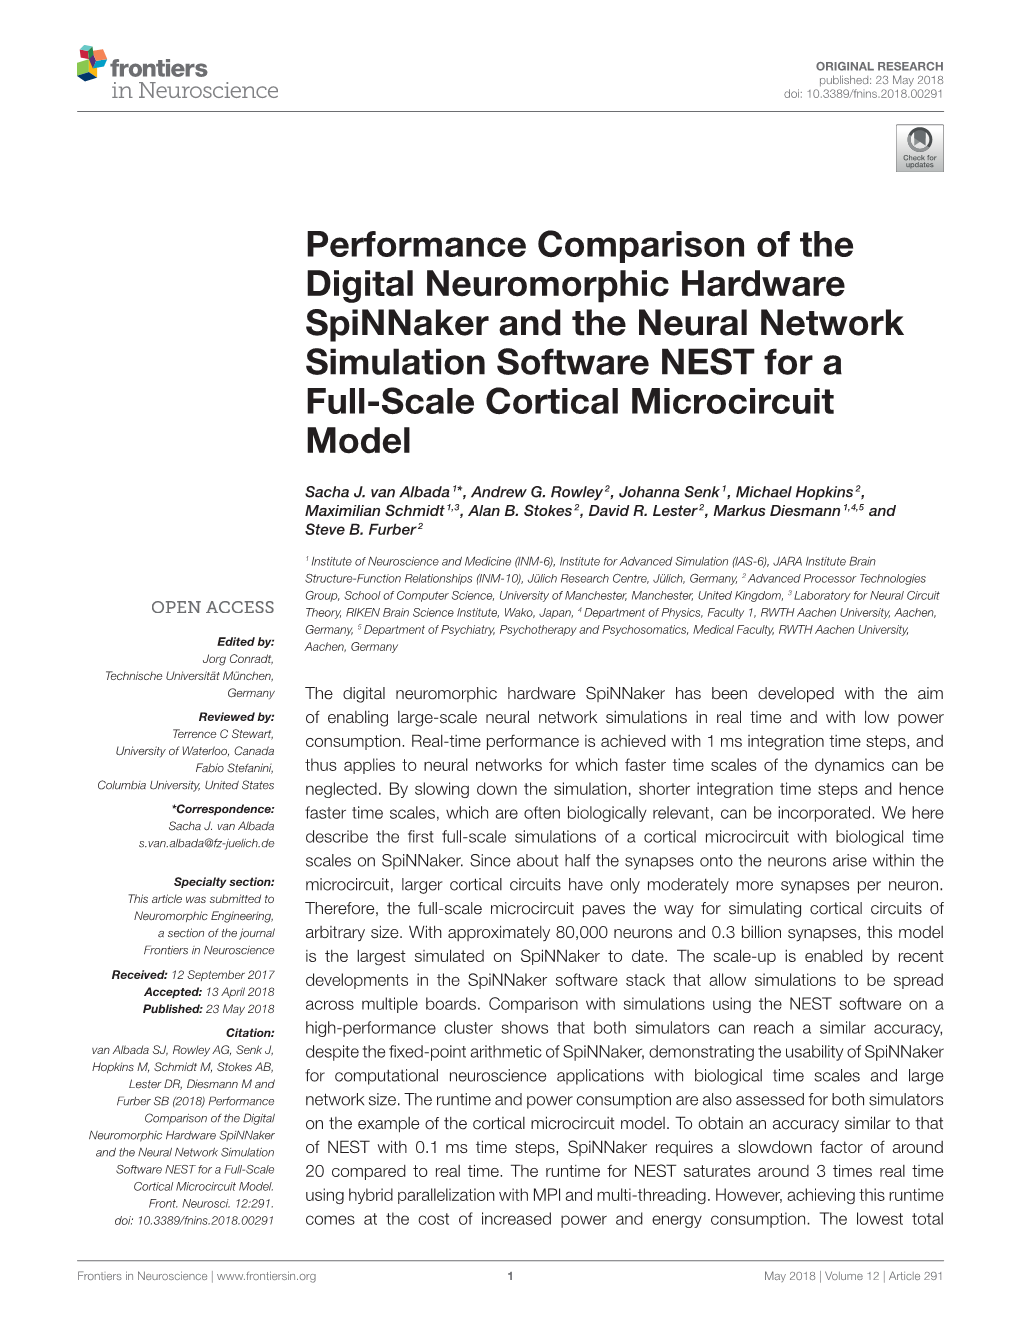 Performance Comparison of the Digital Neuromorphic Hardware Spinnaker and the Neural Network Simulation Software NEST for a Full-Scale Cortical Microcircuit Model